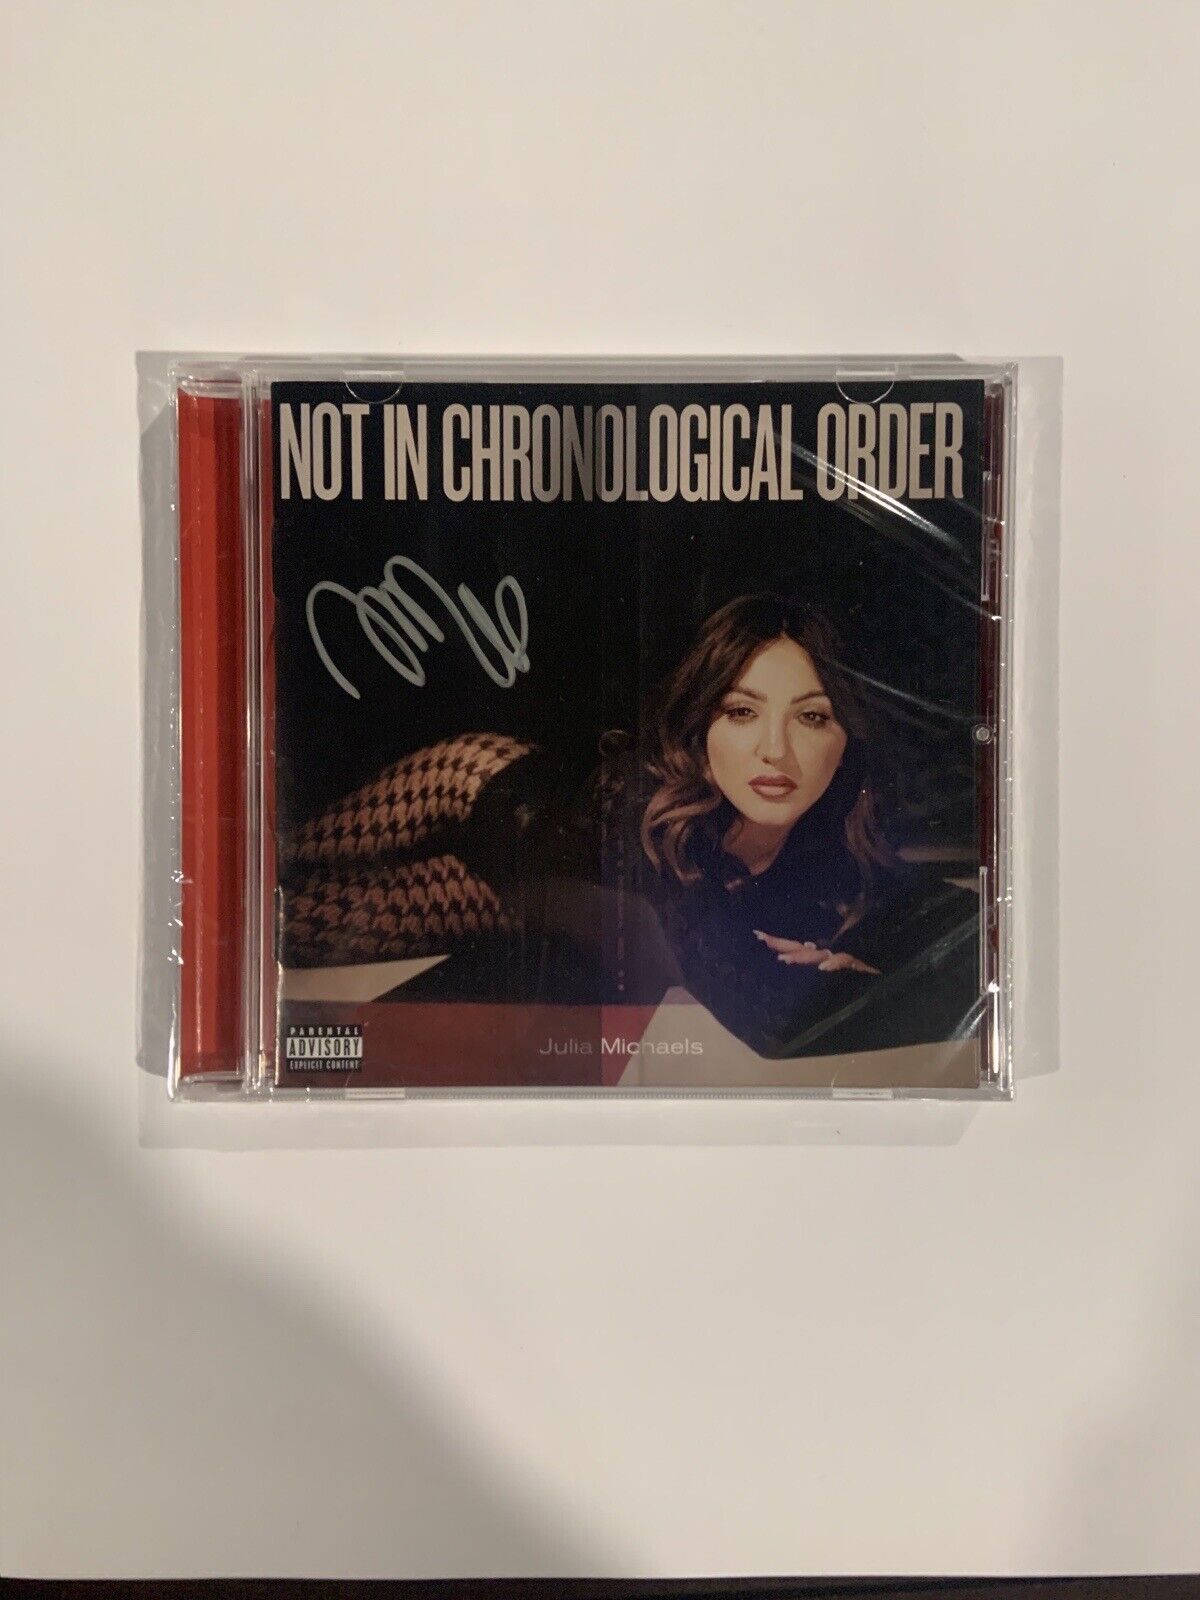 Julia Michaels Autographed CD Not In Chronological Order HOT  **SOLD OUT**